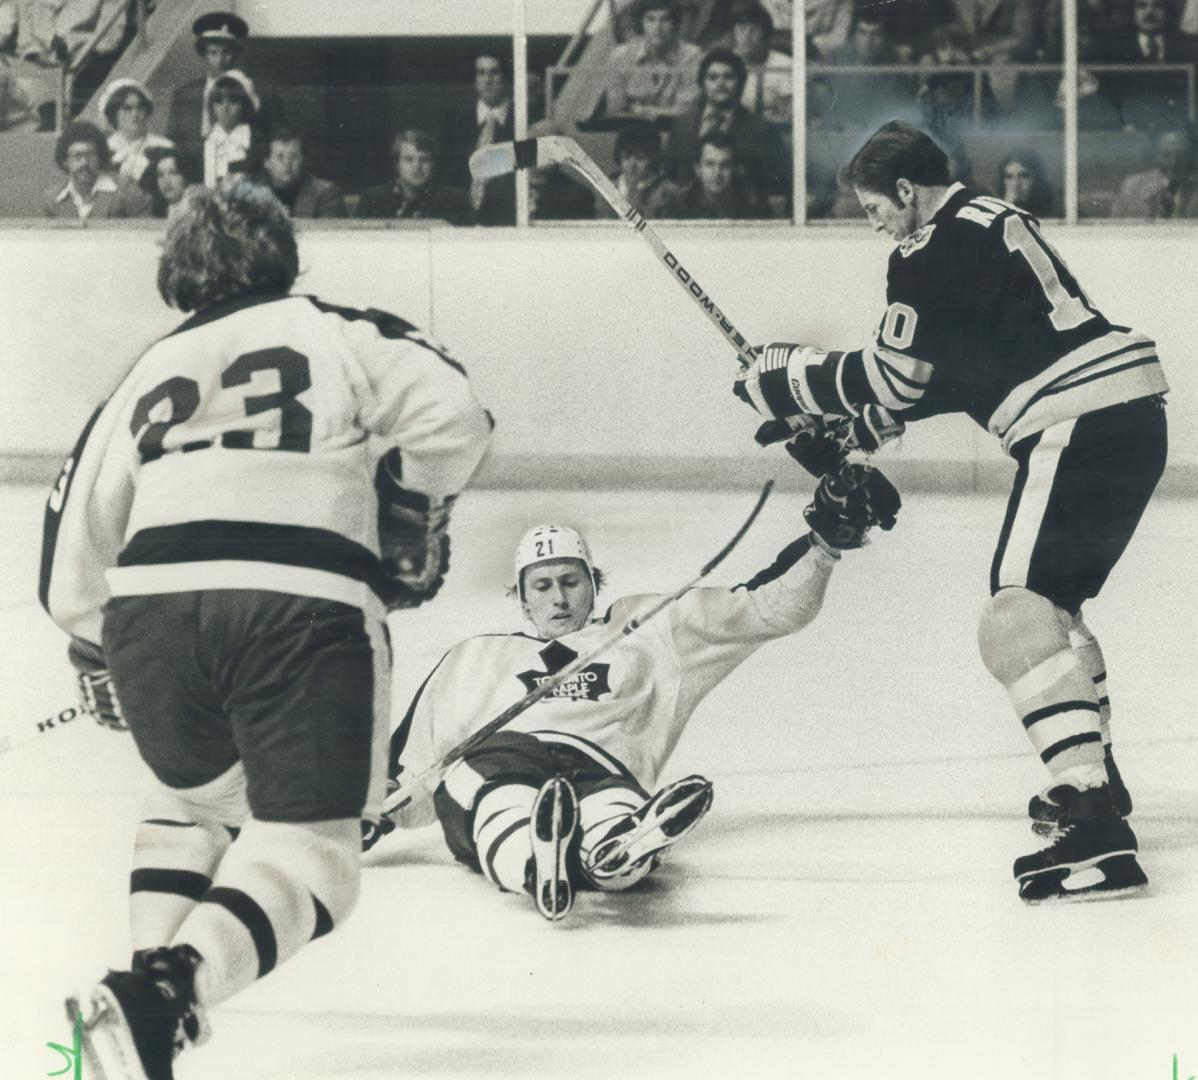 Leafs' Borje Salming closes legs on puck as Boston's Jean Ratelle hovers and teammate Randy Carlyle closes in